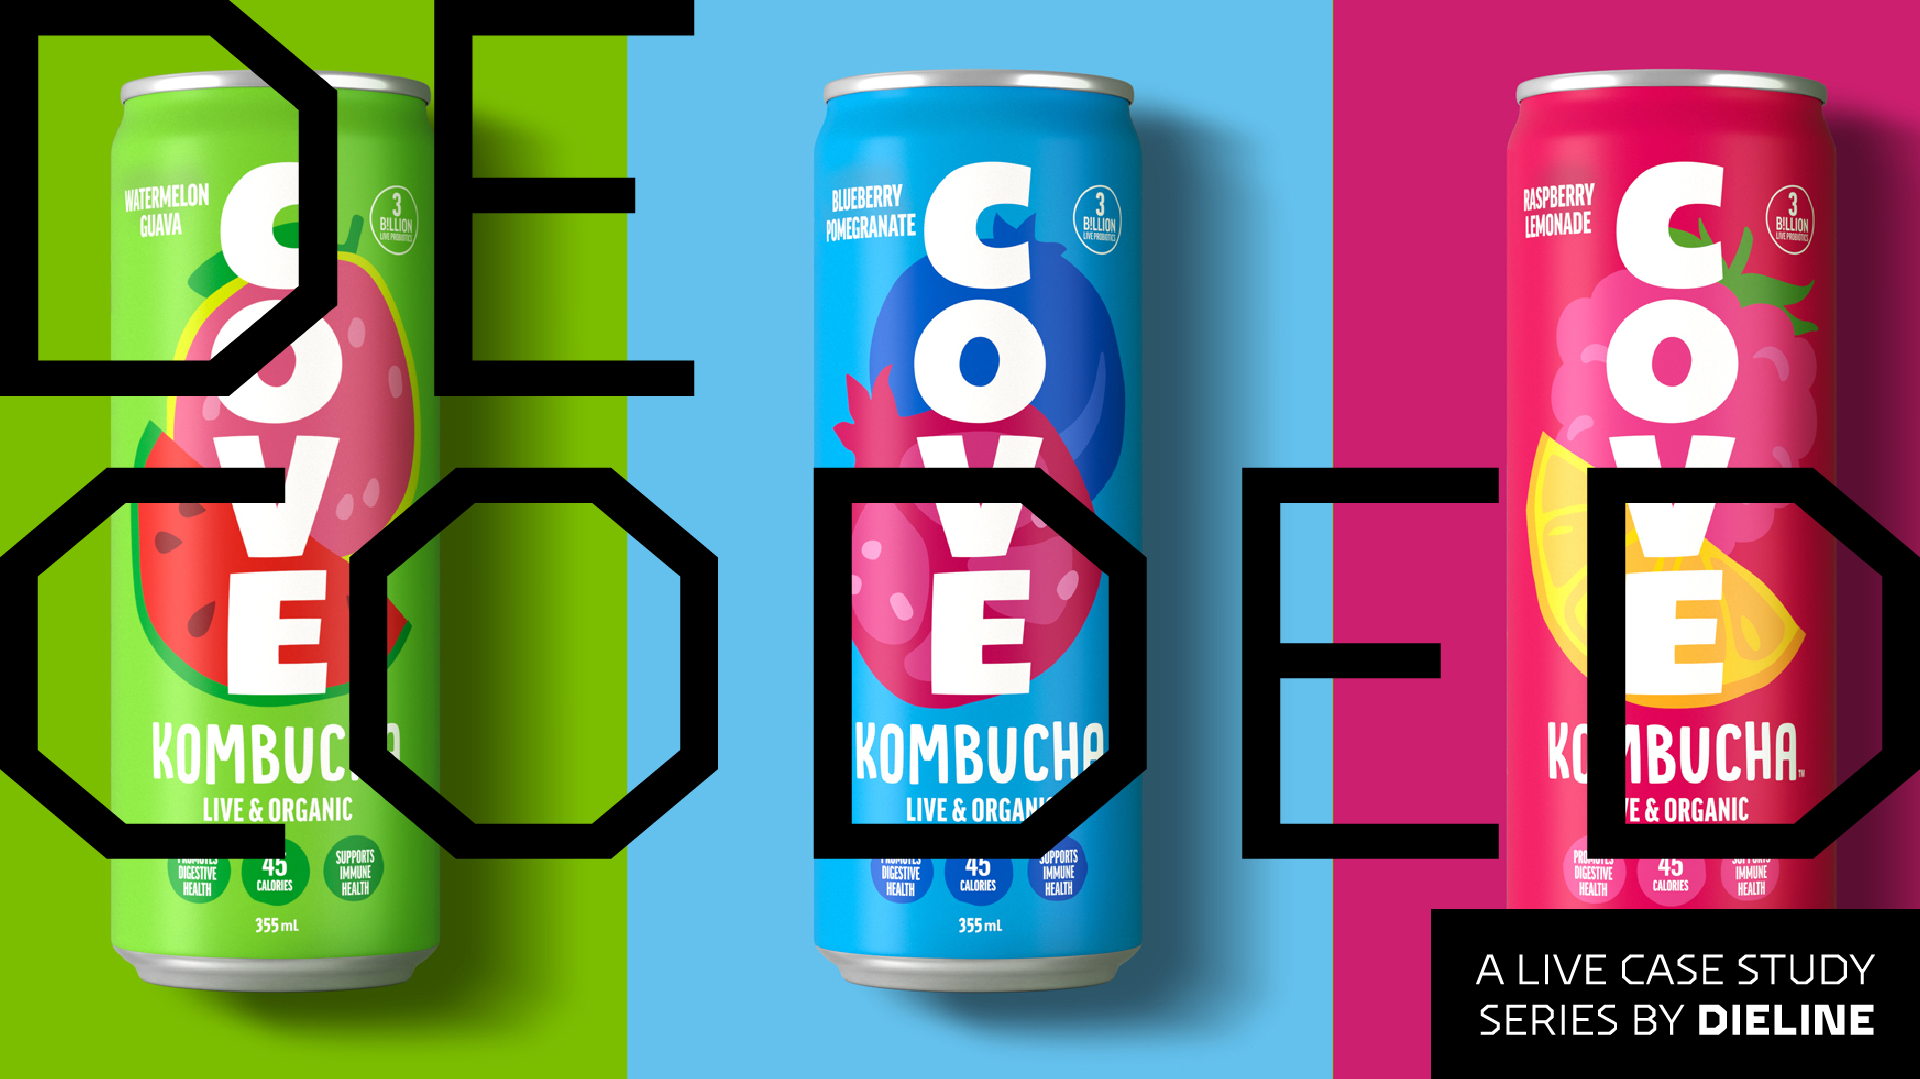 DIELINE DECODED: A Sip of Cove: Rebranding Cove Kombucha with Flavorful Style